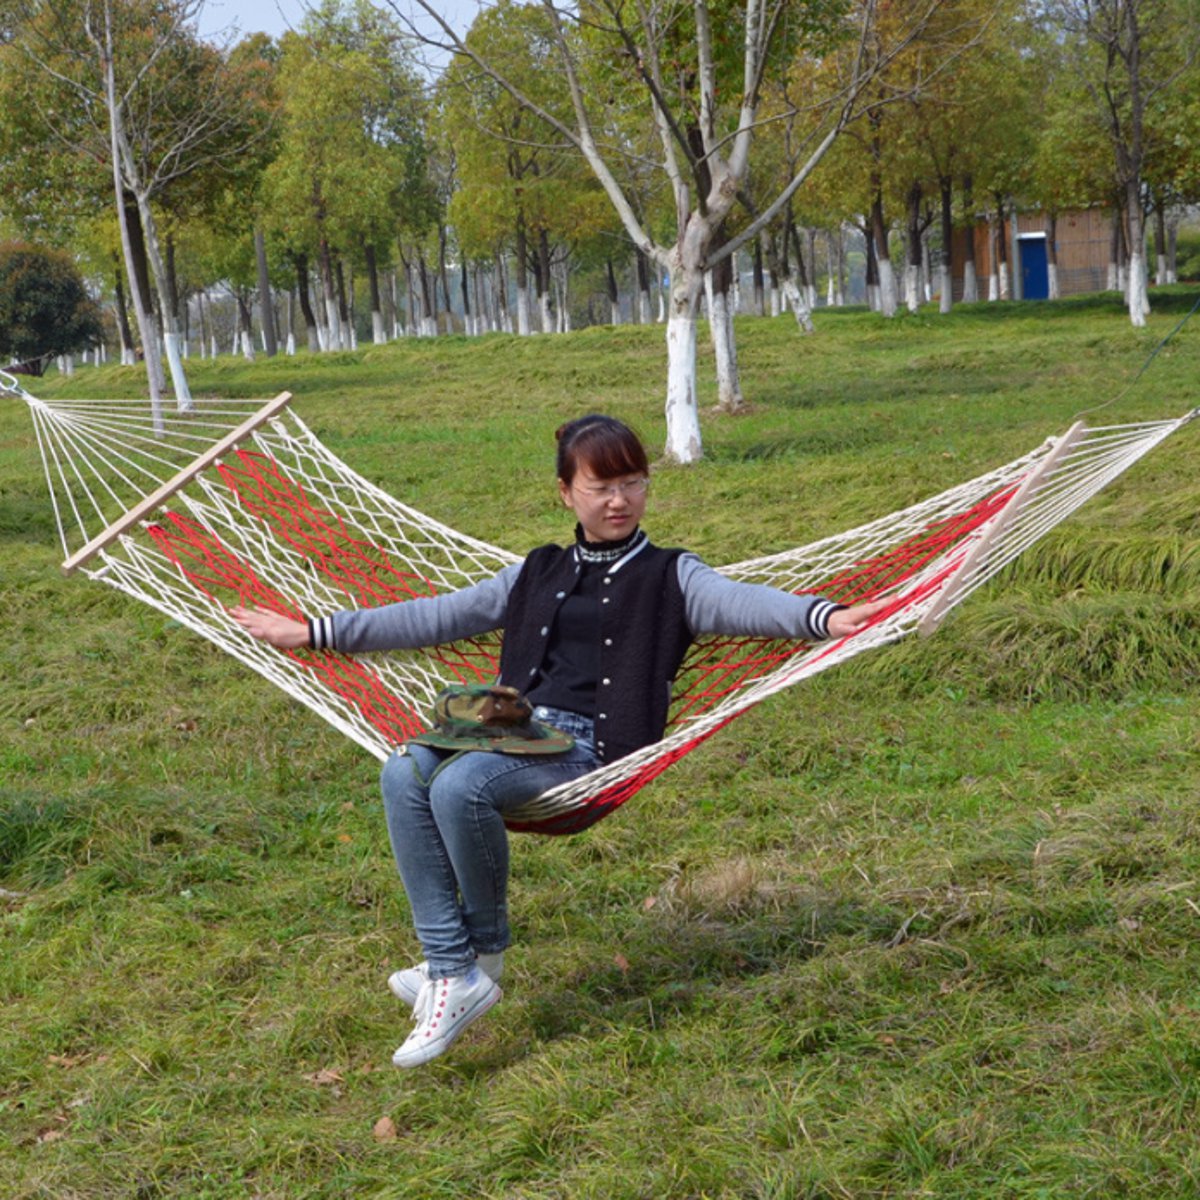 190x80cm-Outdoor-Camping-Hammock-Cotton-Rope-Swing-Hanging-Bed-Garden-Patio-Max-Load-100kg-1445183